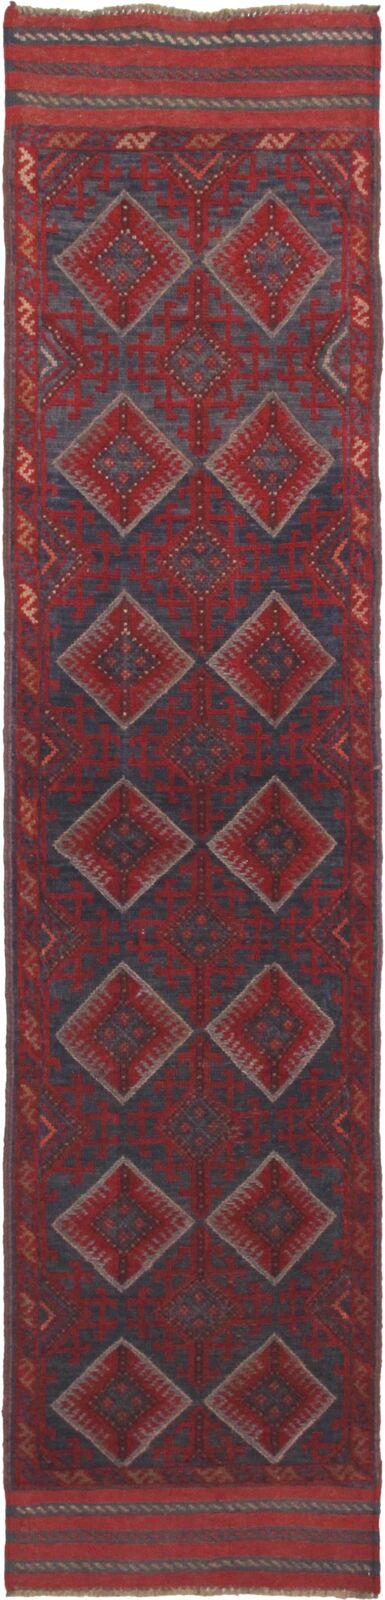 2' x 9' Mashwani Rugs for Sale Online Tribal Hand-Knotted Blue & Red Runner